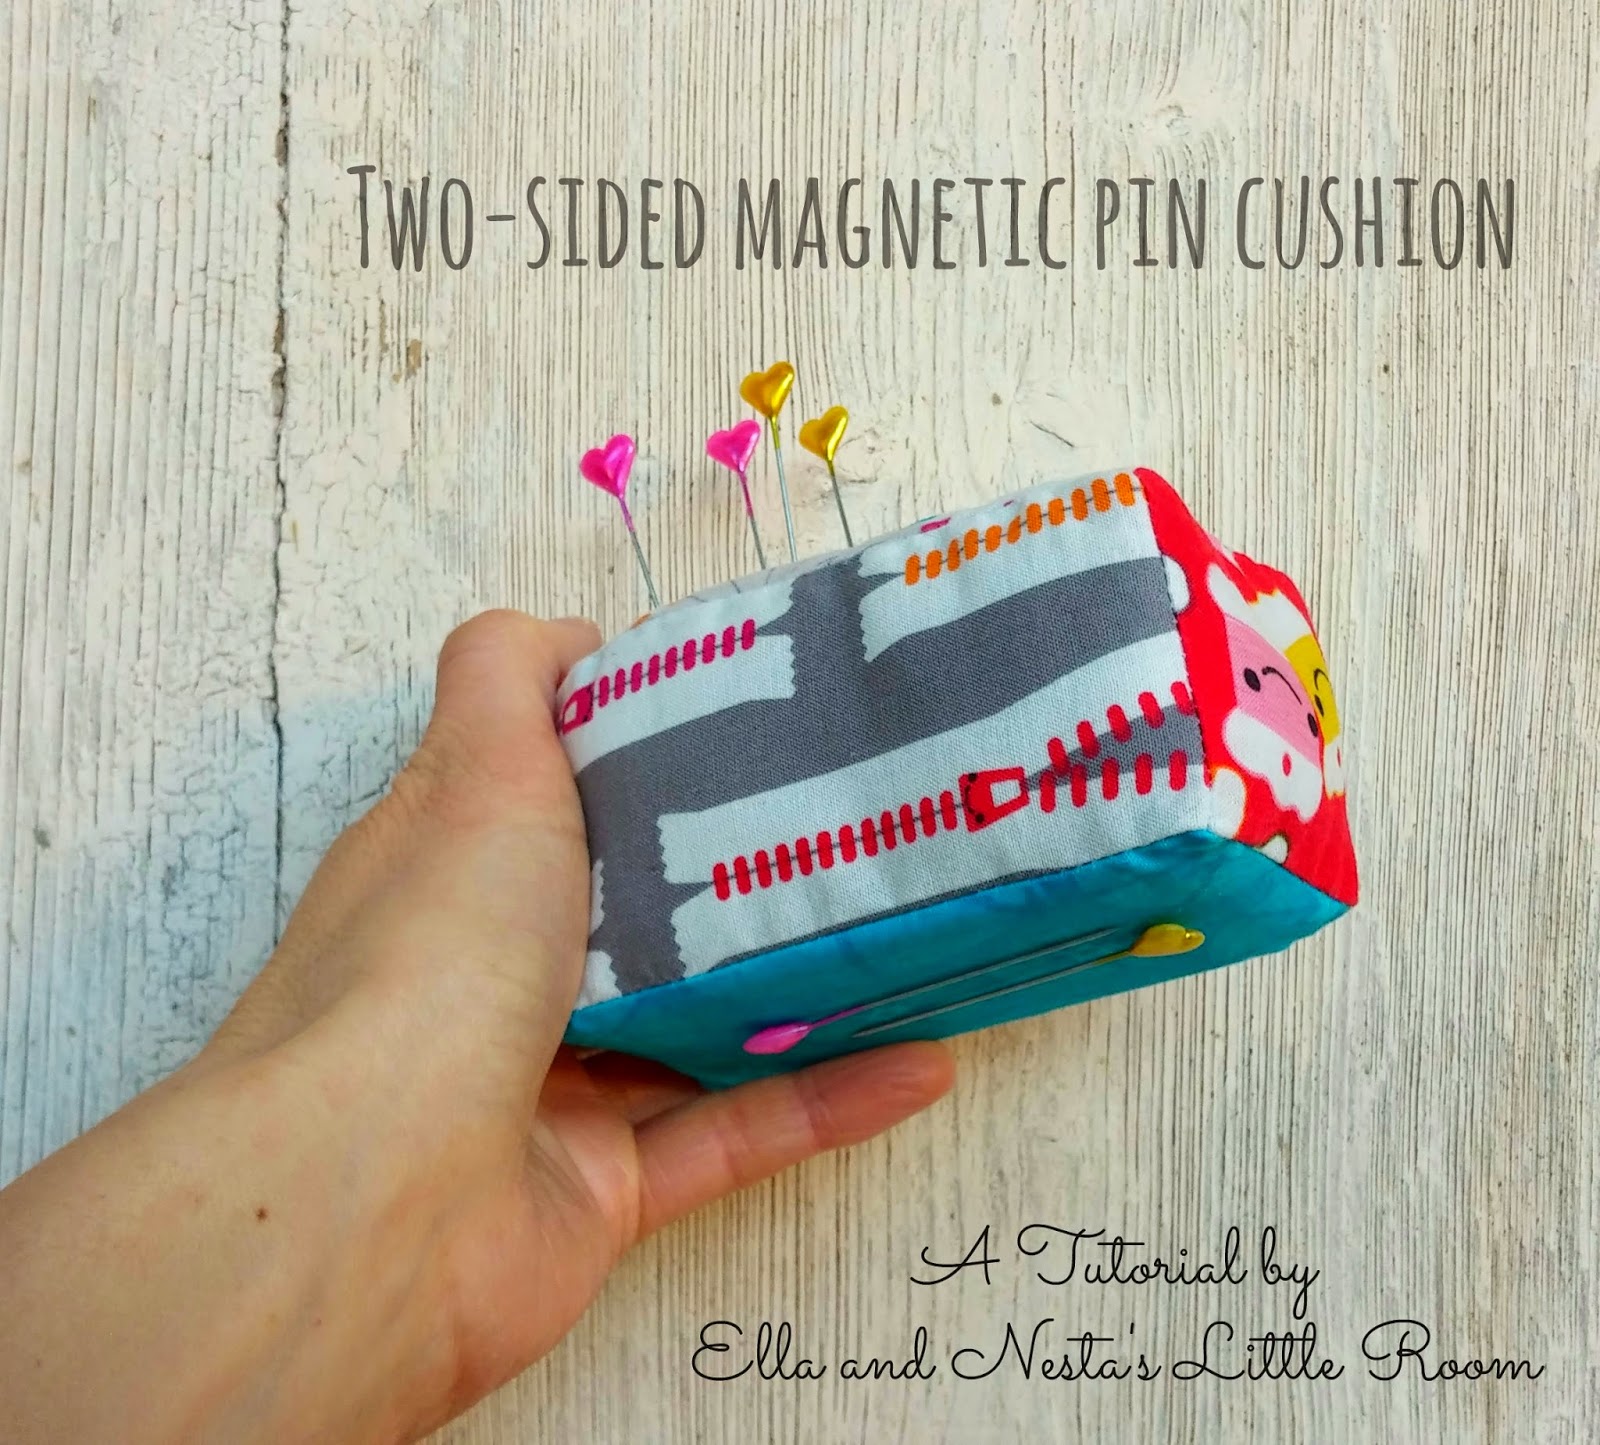 Ella & Nesta's Little Room: How to make a Two-Sided Magnetic